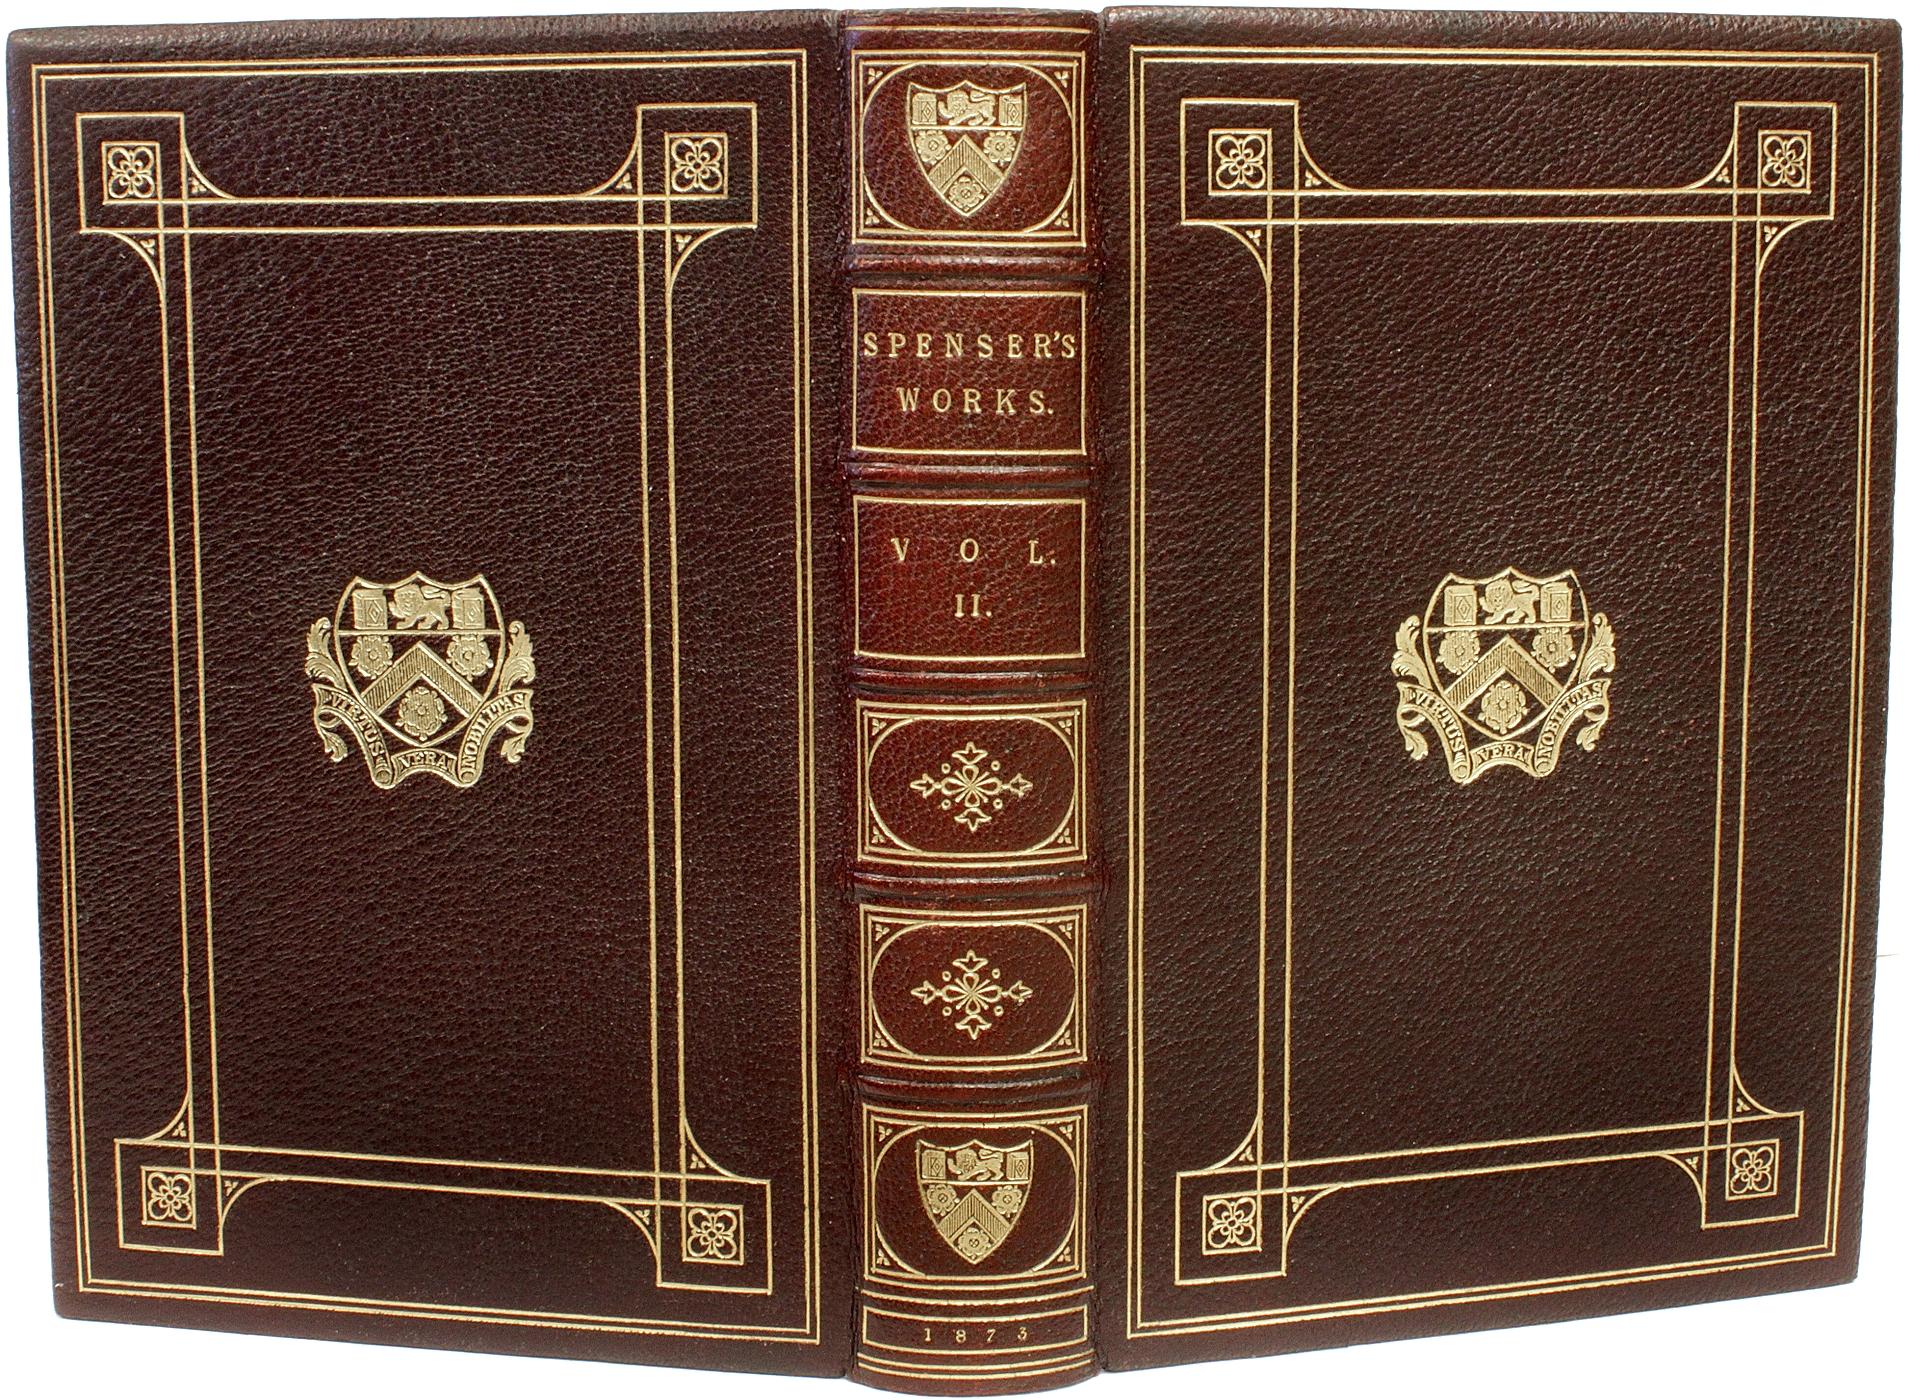 British The Works Of Edmund Spenser. 5 VOLUMES - IN A FINE FULL LEATHER BINDING ! For Sale